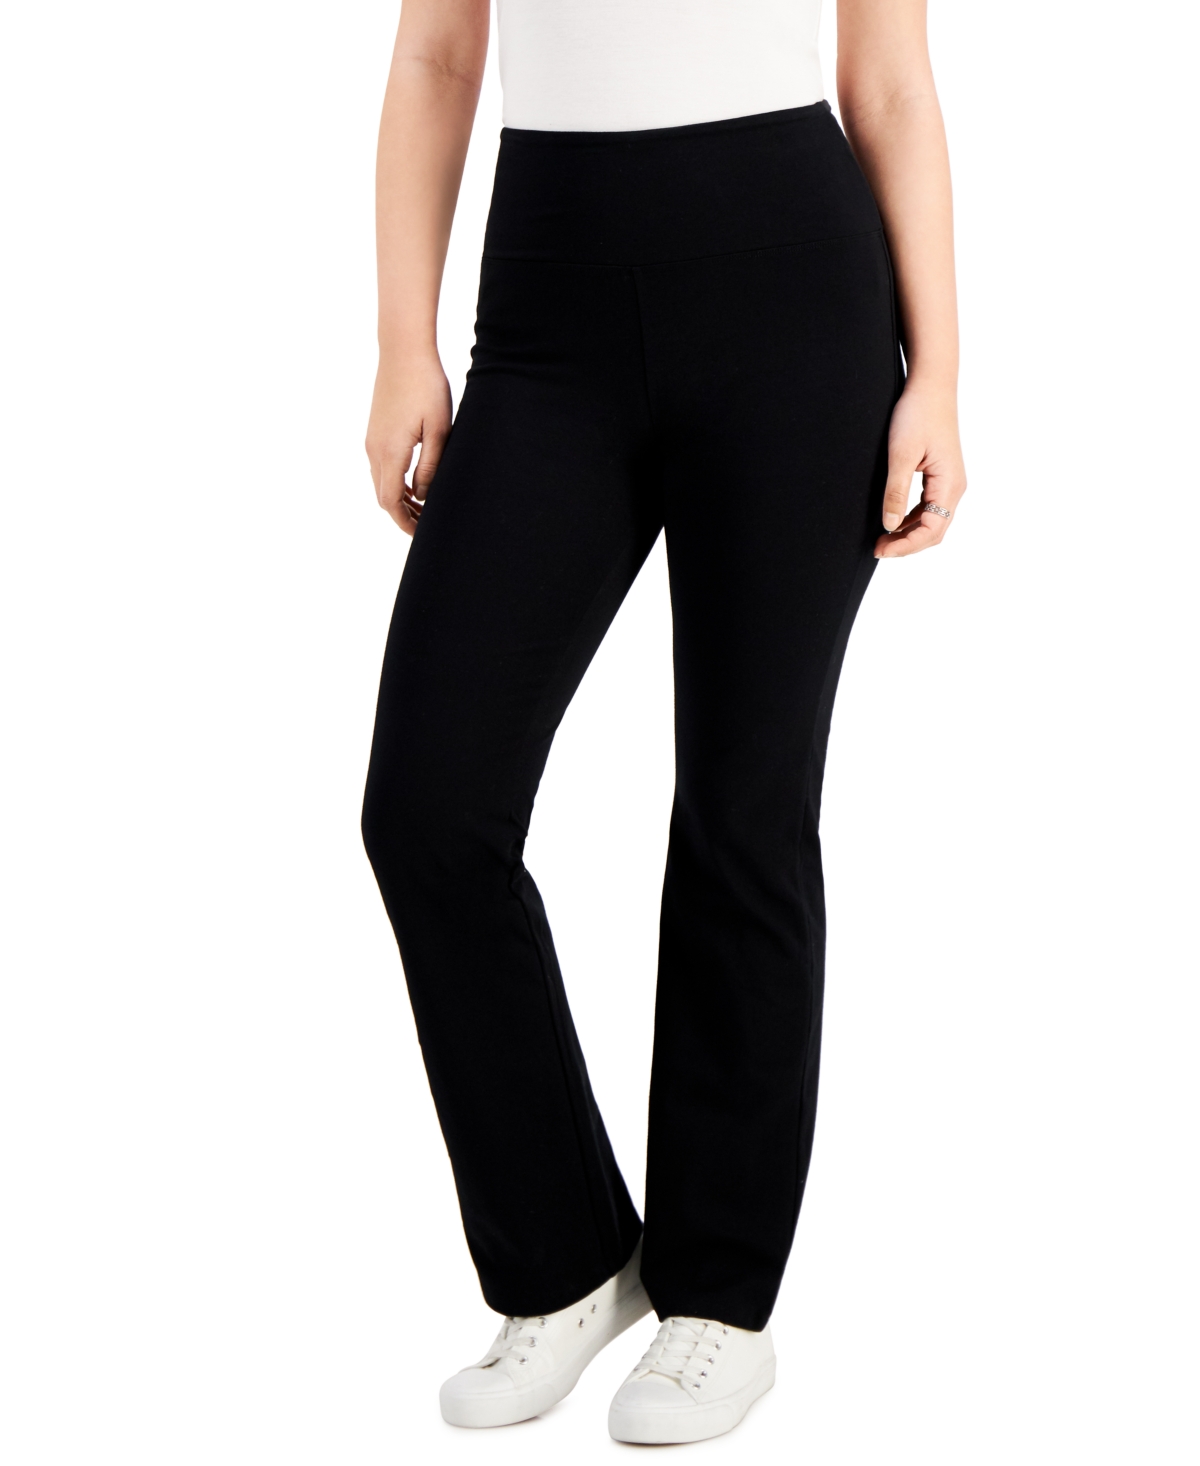 STYLE & CO PETITE HIGH RISE BOOTCUT LEGGINGS, CREATED FOR MACY'S